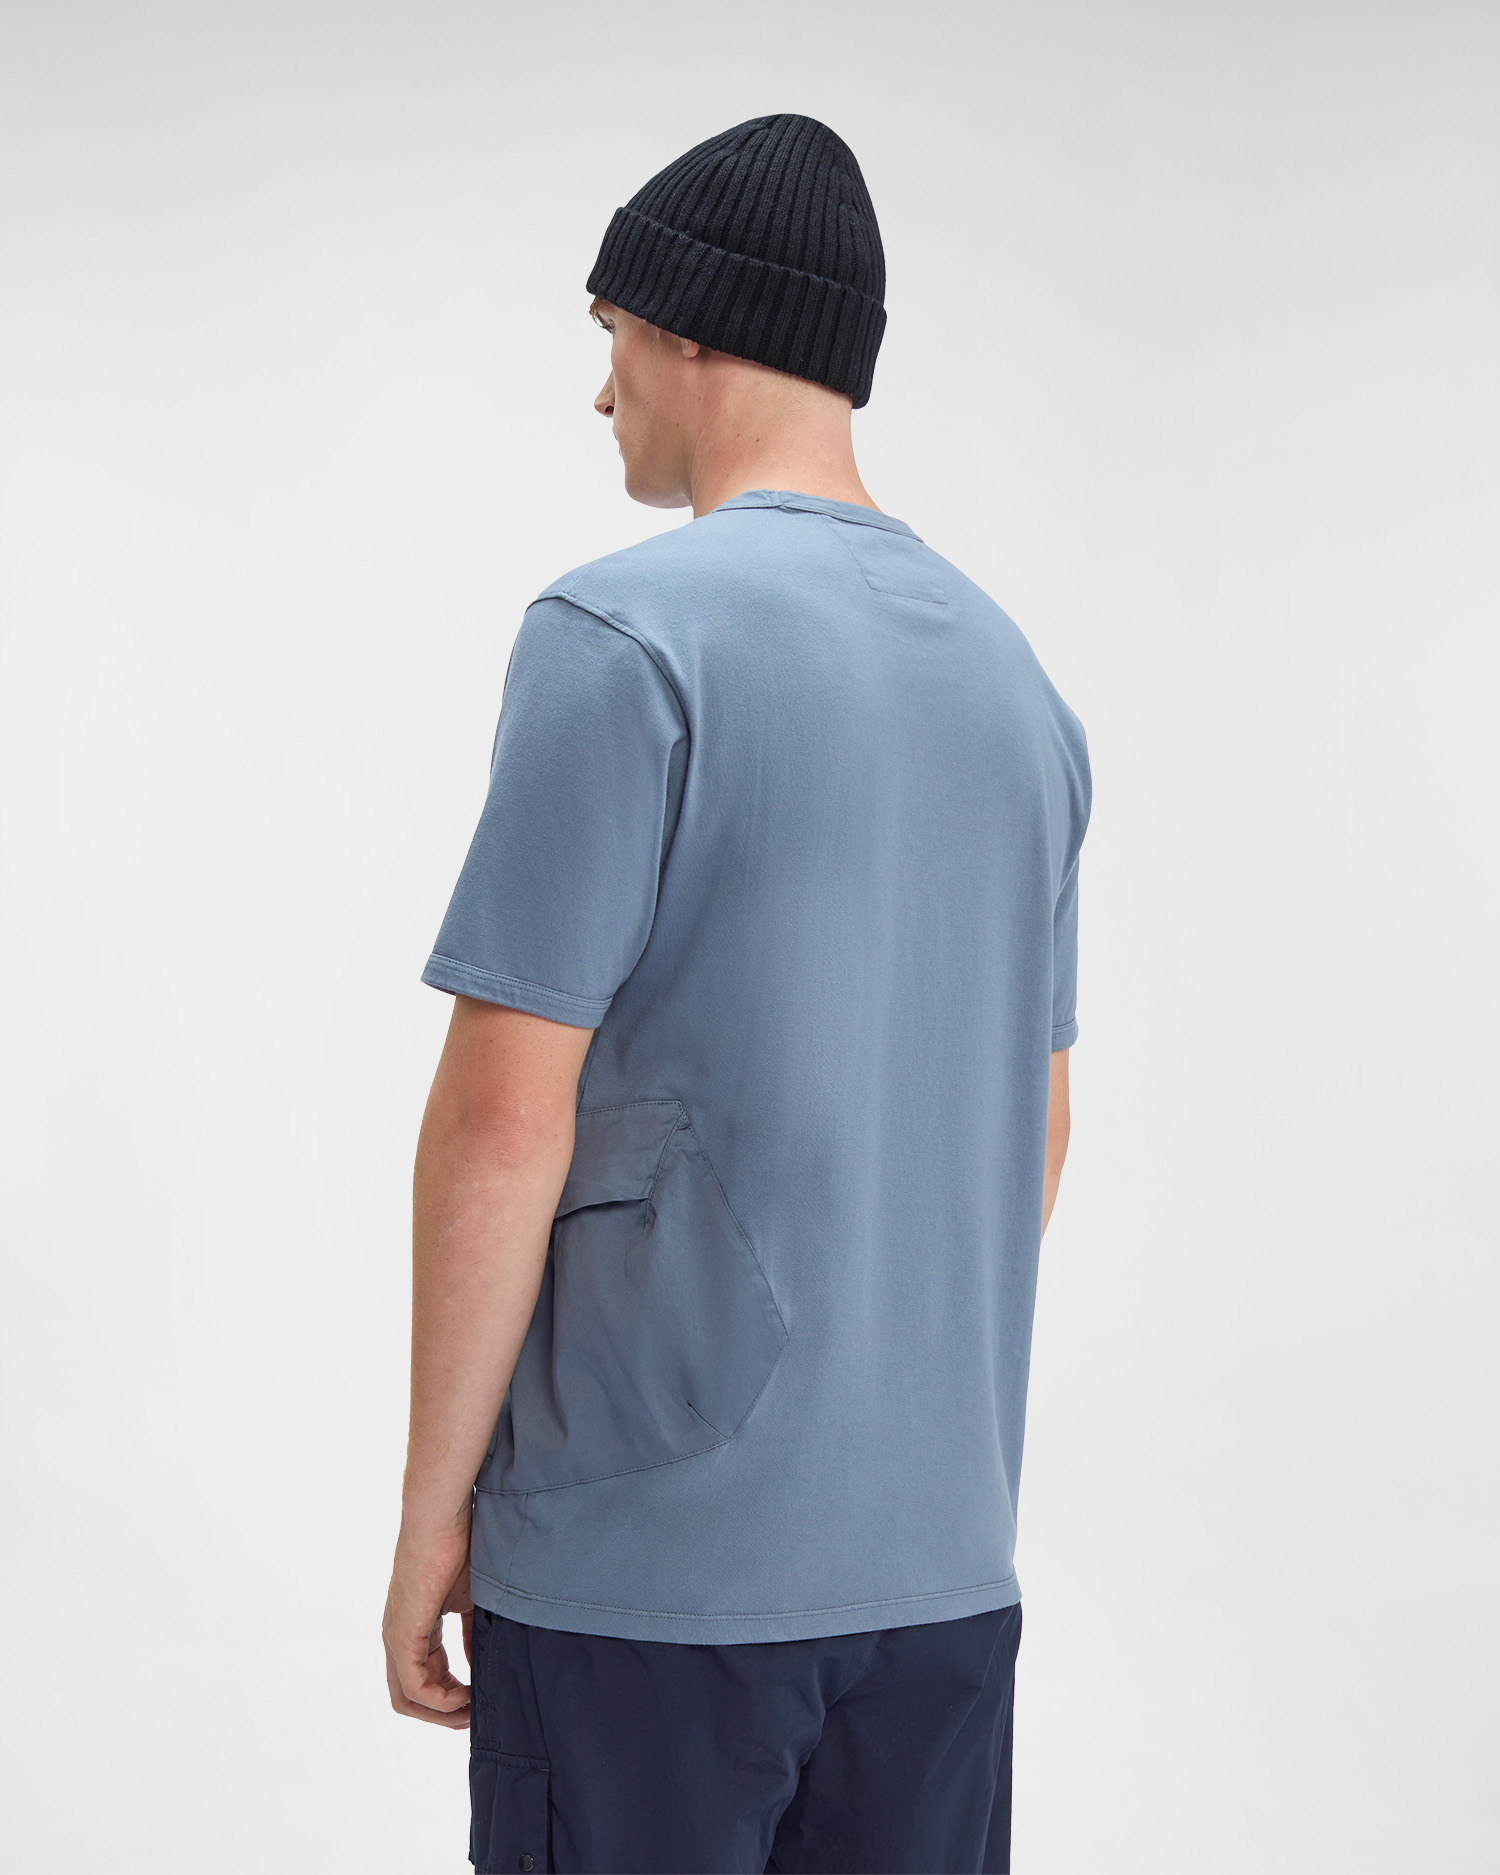 20/1 Jersey Mixed Side Pocket T-shirt | C.P. Company Online Store